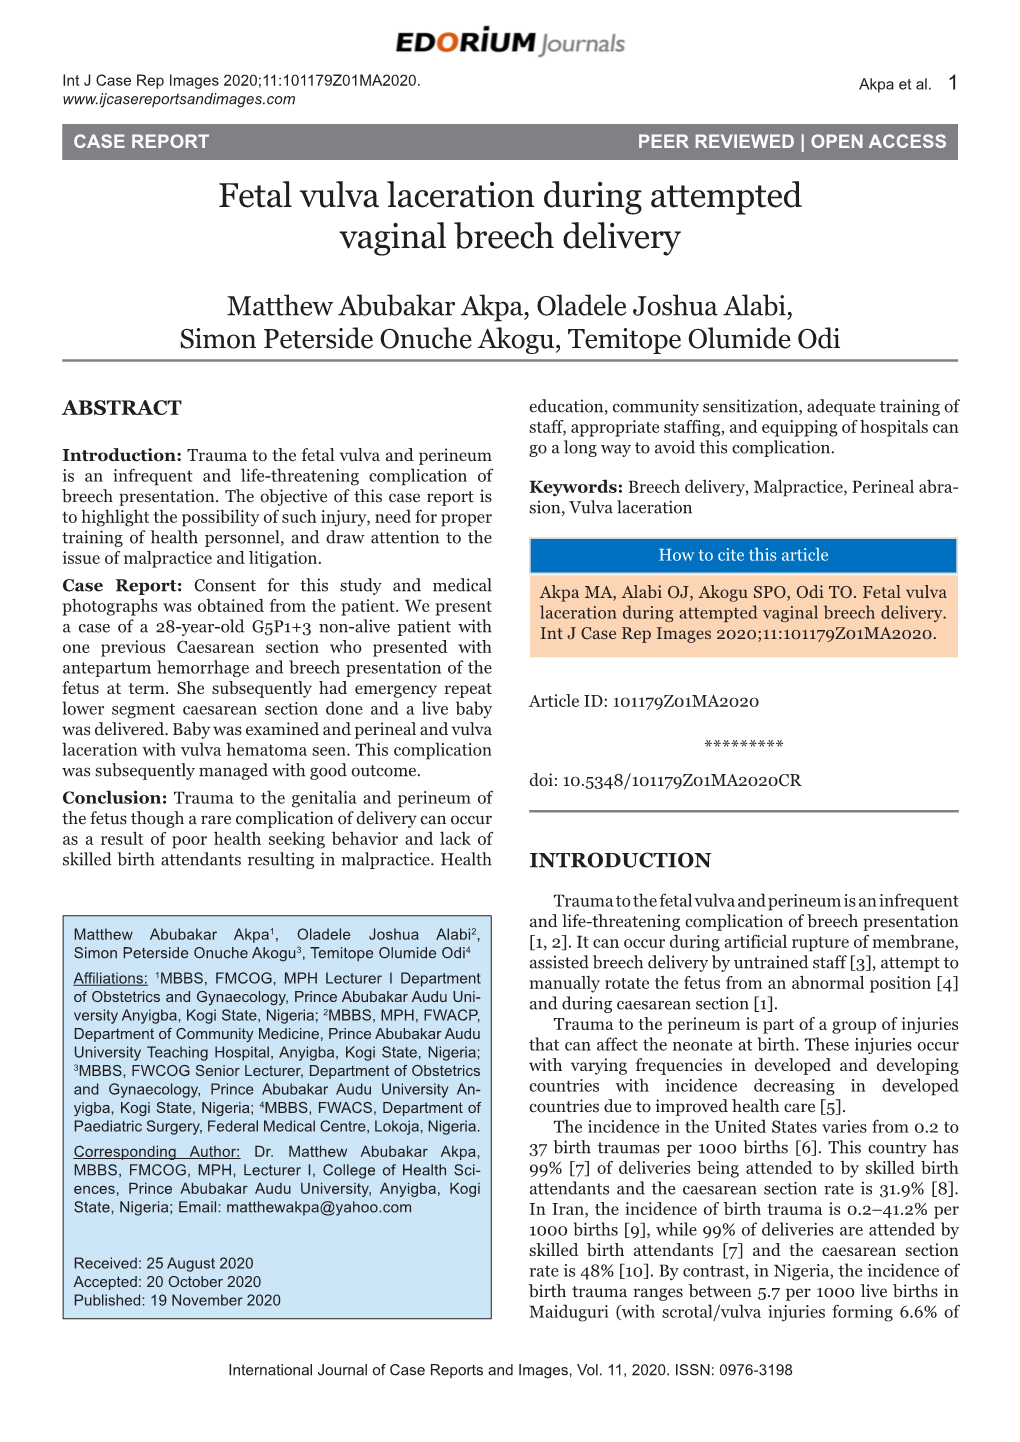 Fetal Vulva Laceration During Attempted Vaginal Breech Delivery